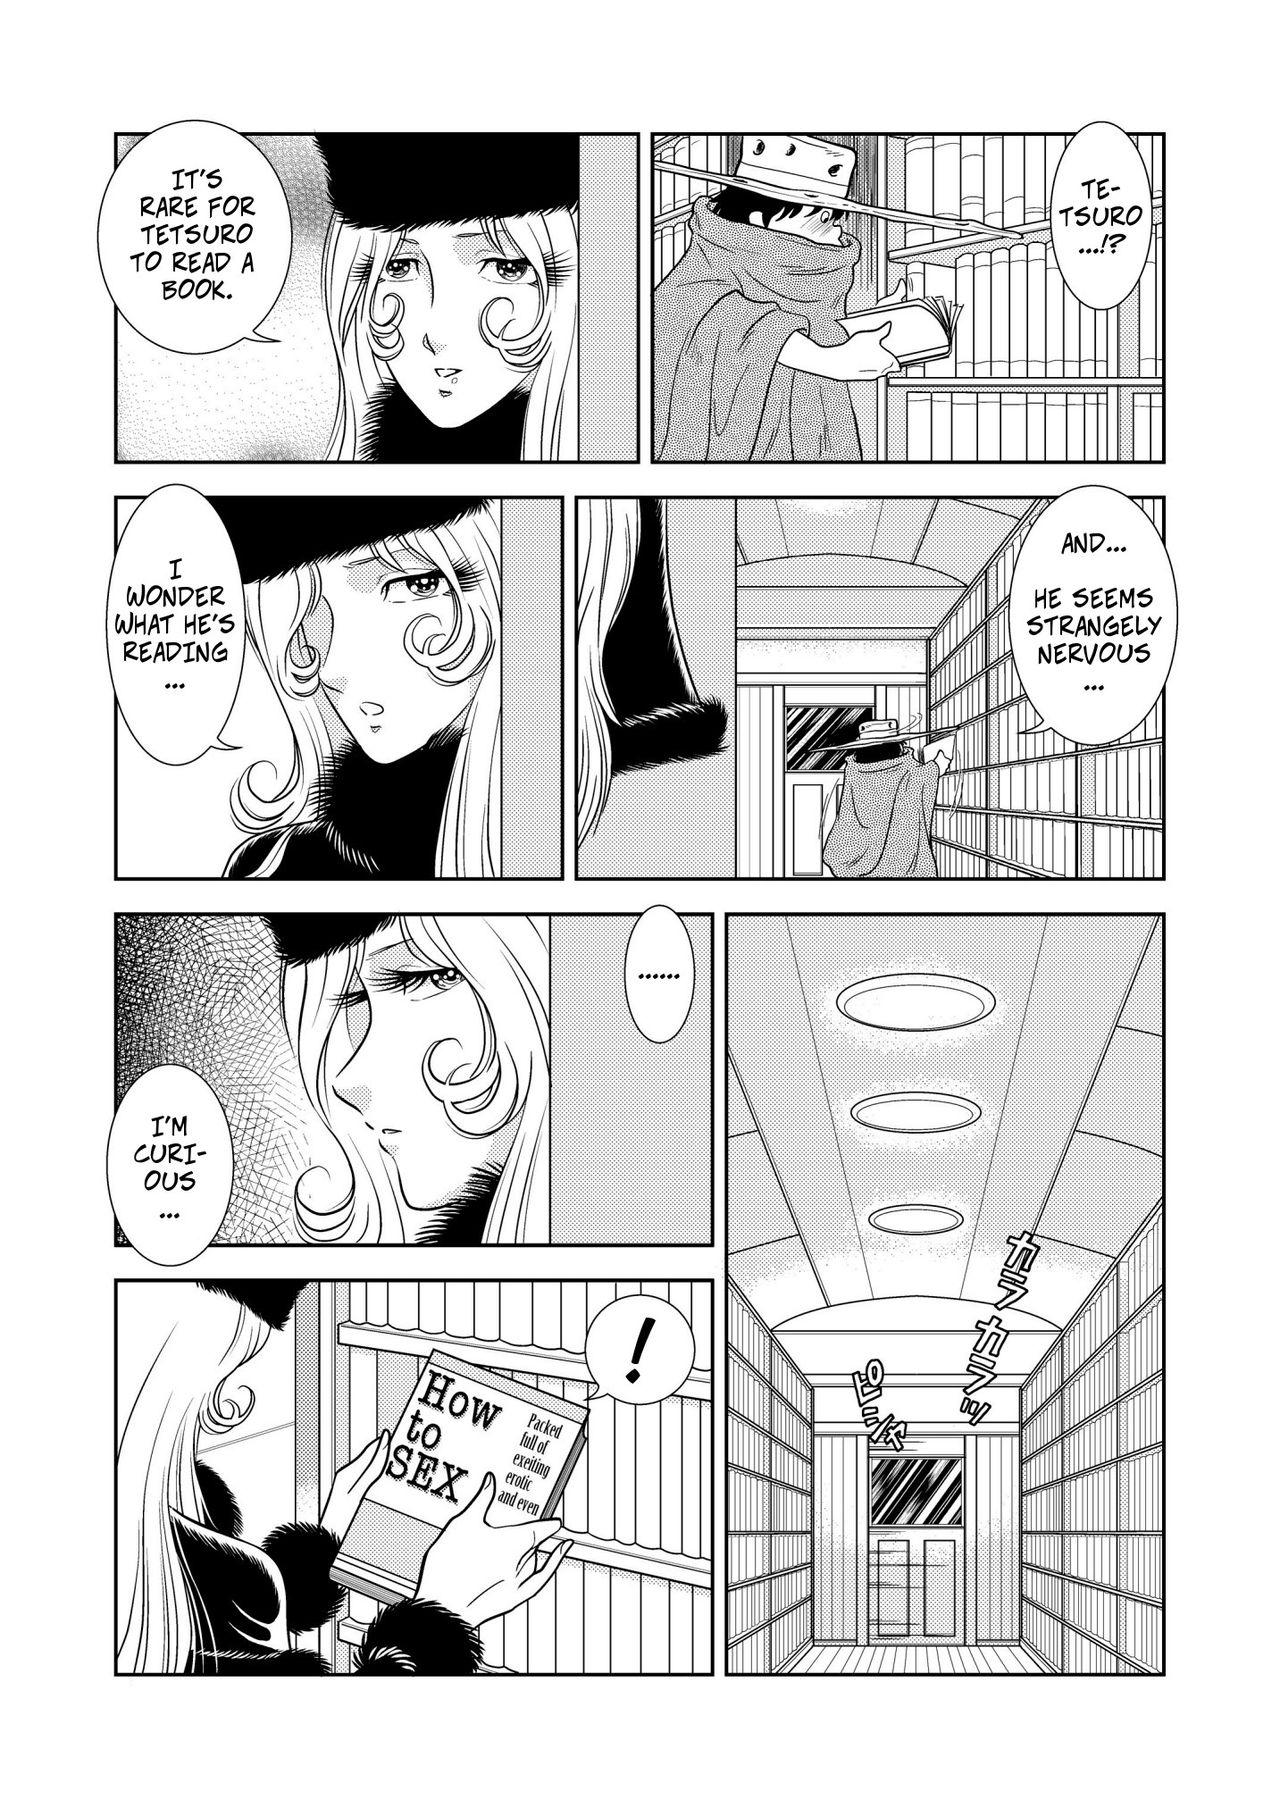 Blowjob Contest Maetel Story 2 - Galaxy express 999 Curves - Page 3